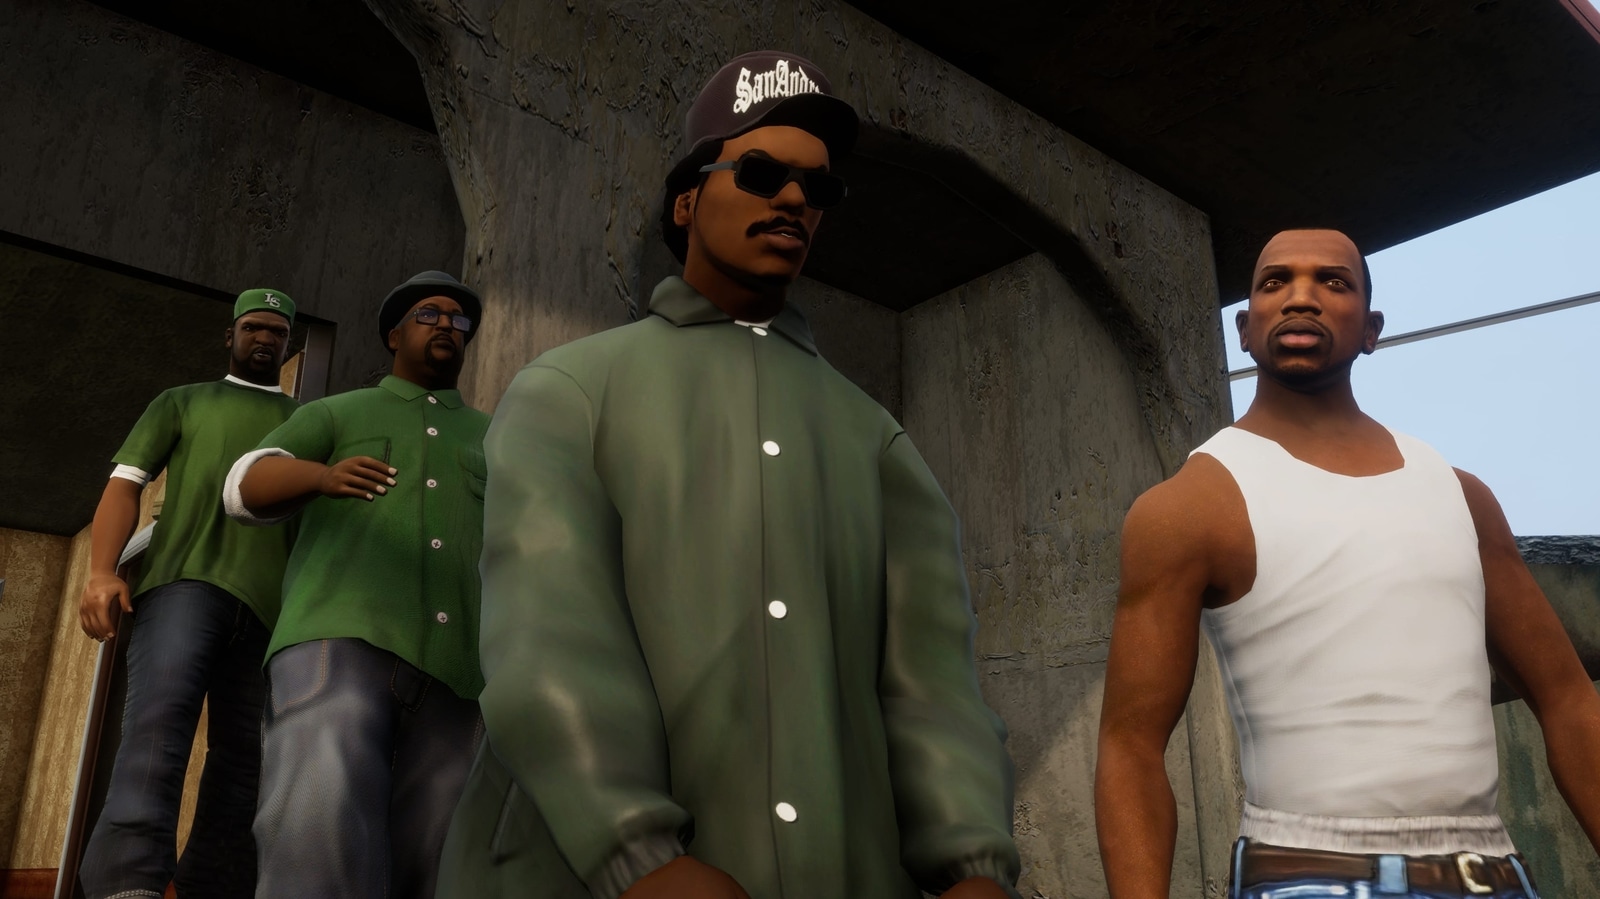 If you own GTA Trilogy on PC, you now have the original games too